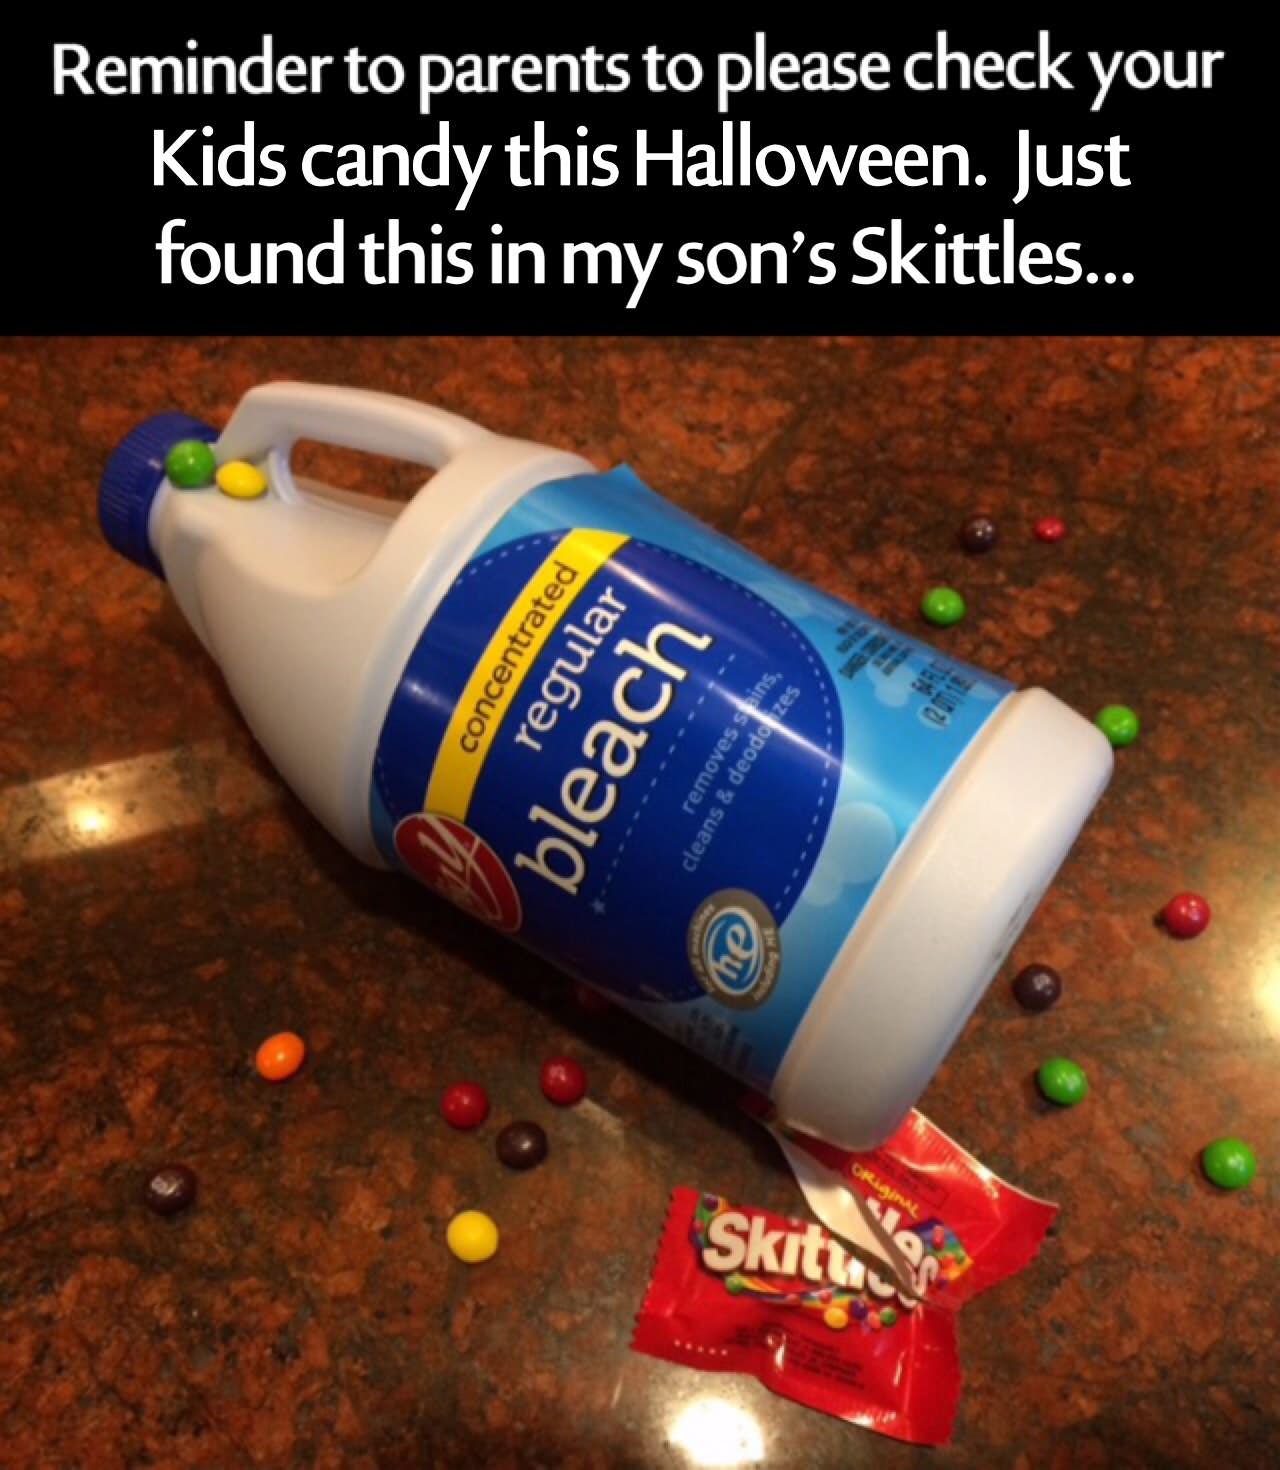 check your kids candy meme - Reminder to parents to please check your Kids candy this Halloween. Just found this in my son's Skittles... concentrated regular bleach removes sins. cleans & deodozes